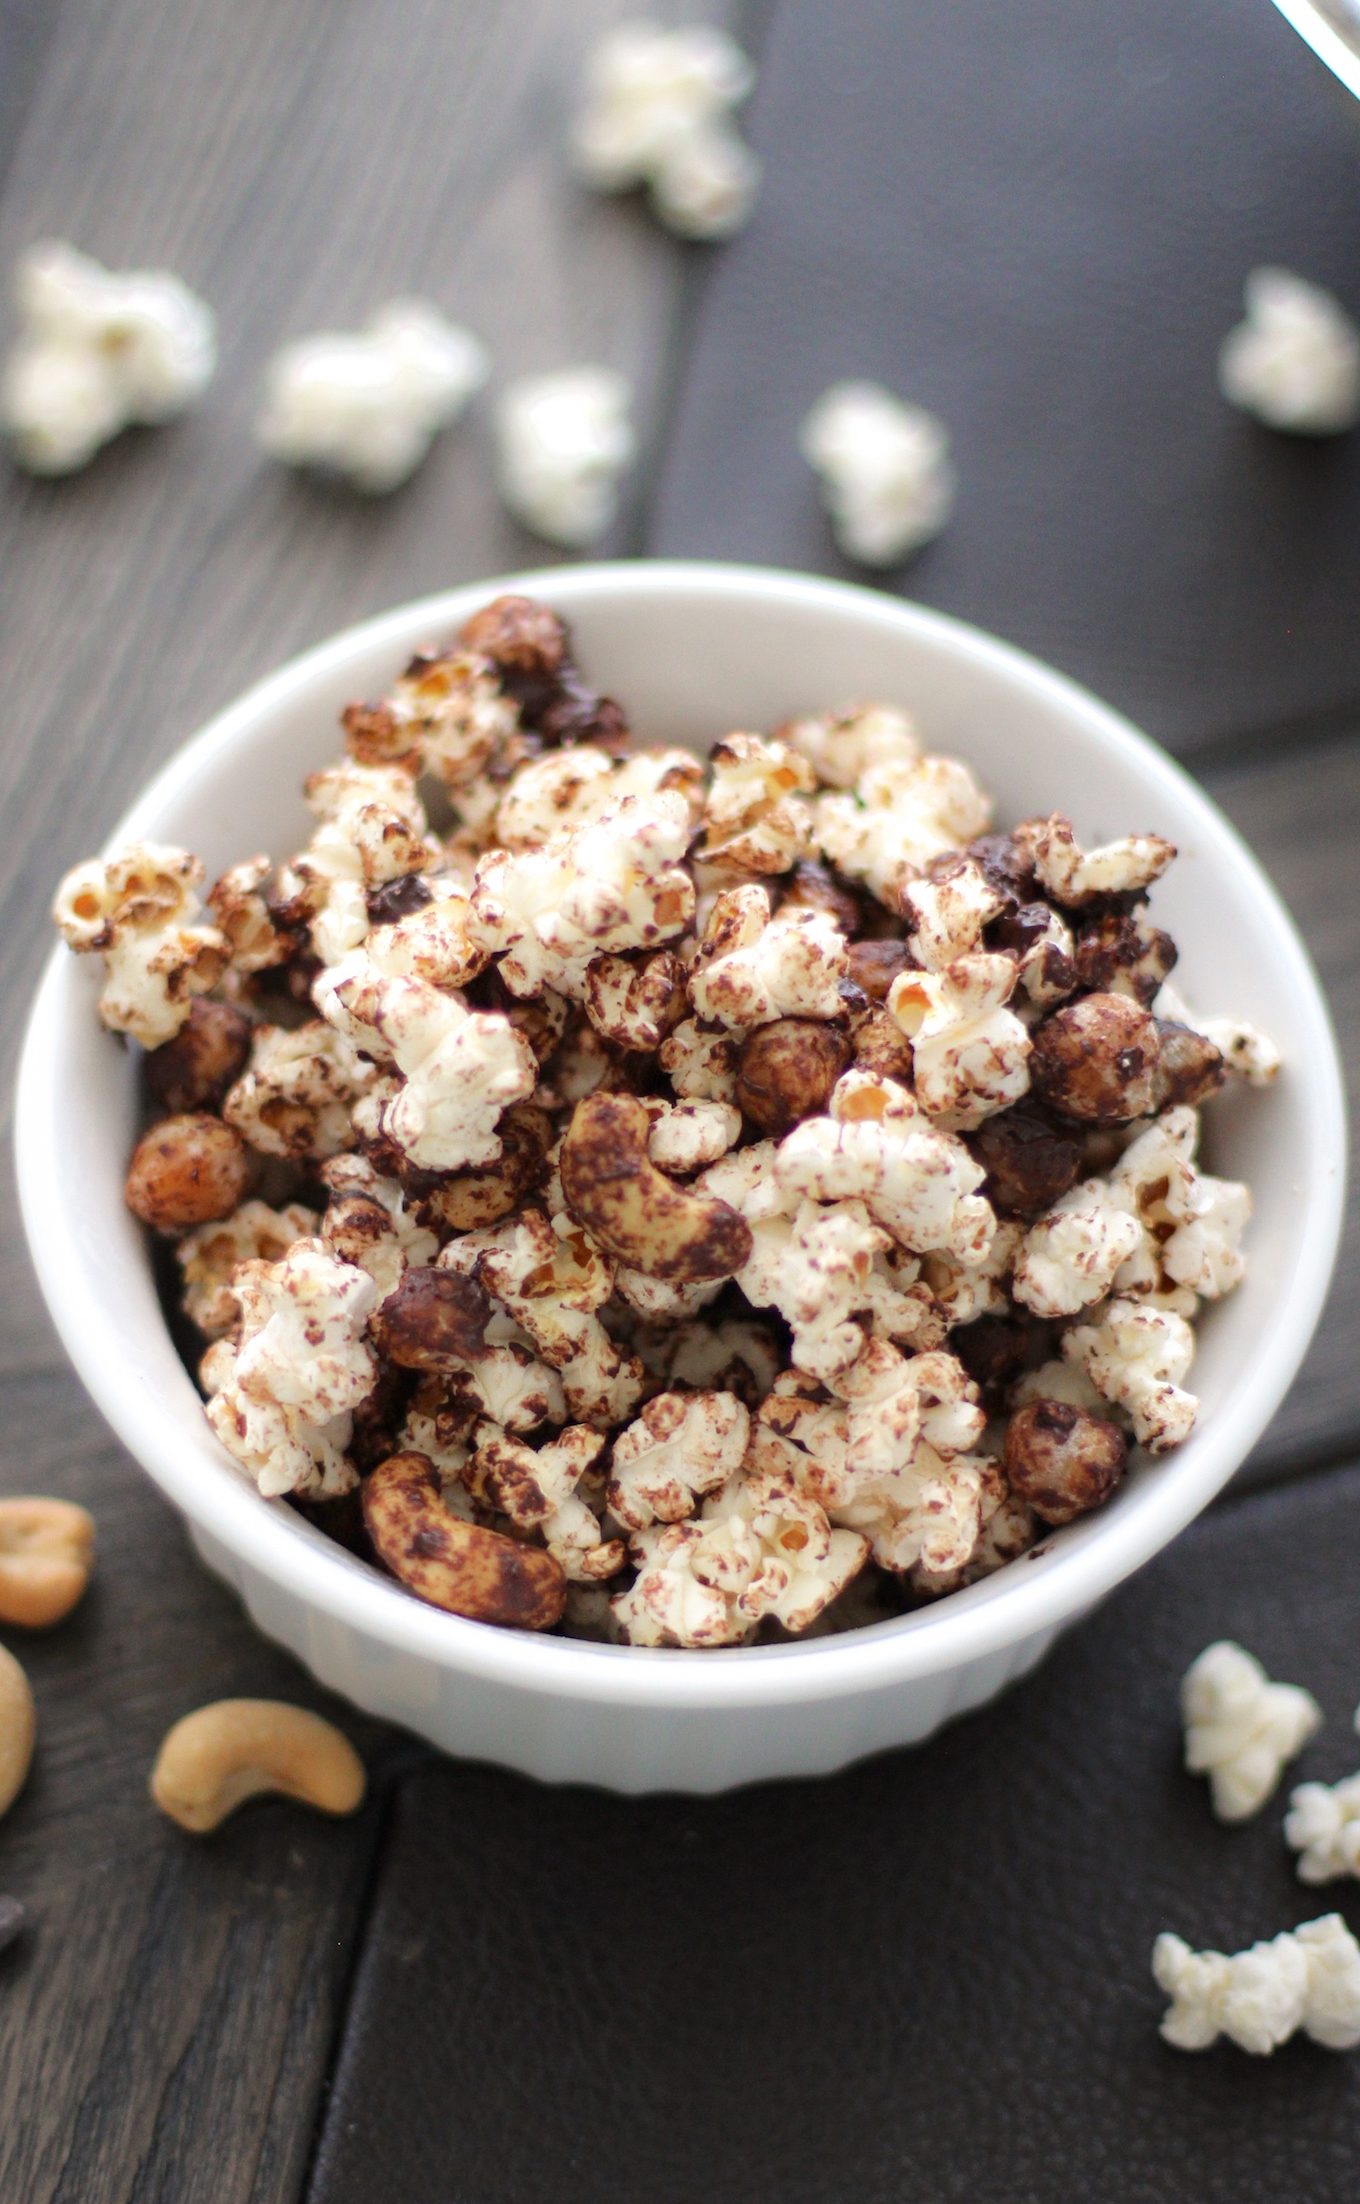 Healthy Chocolate Cashew Popcorn – the Perfect Snack for Game Day! (sugar free, low fat, high protein, high fiber, gluten free, dairy free, vegan) - Healthy Dessert Recipes at Desserts with Benefits